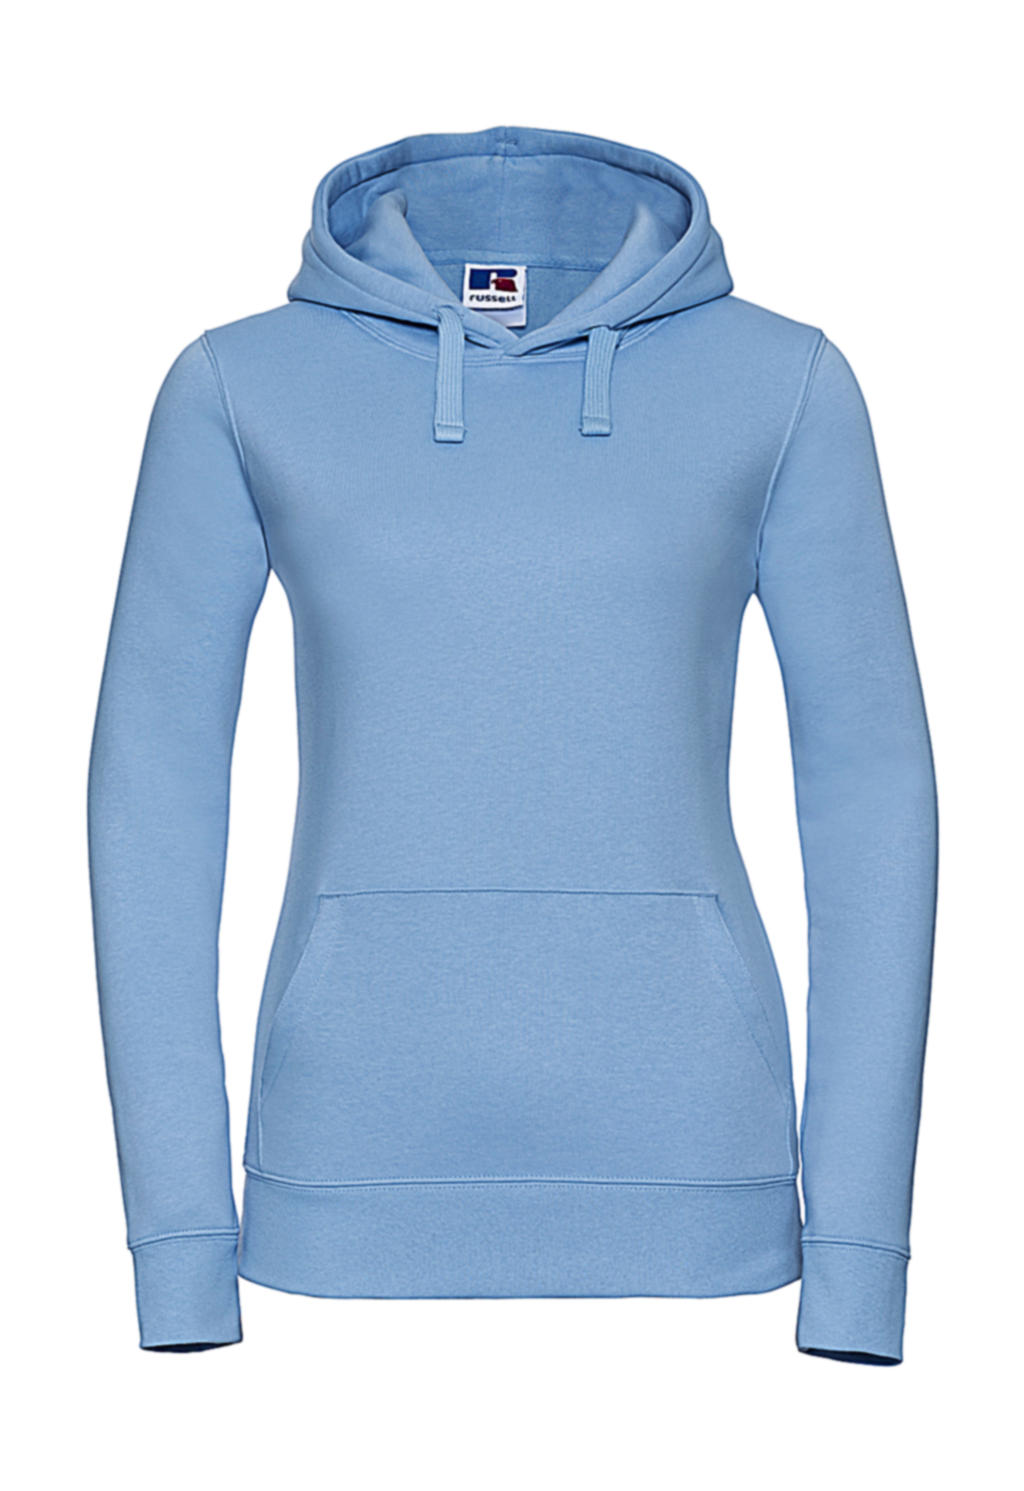  Ladies Authentic Hooded Sweat in Farbe Sky